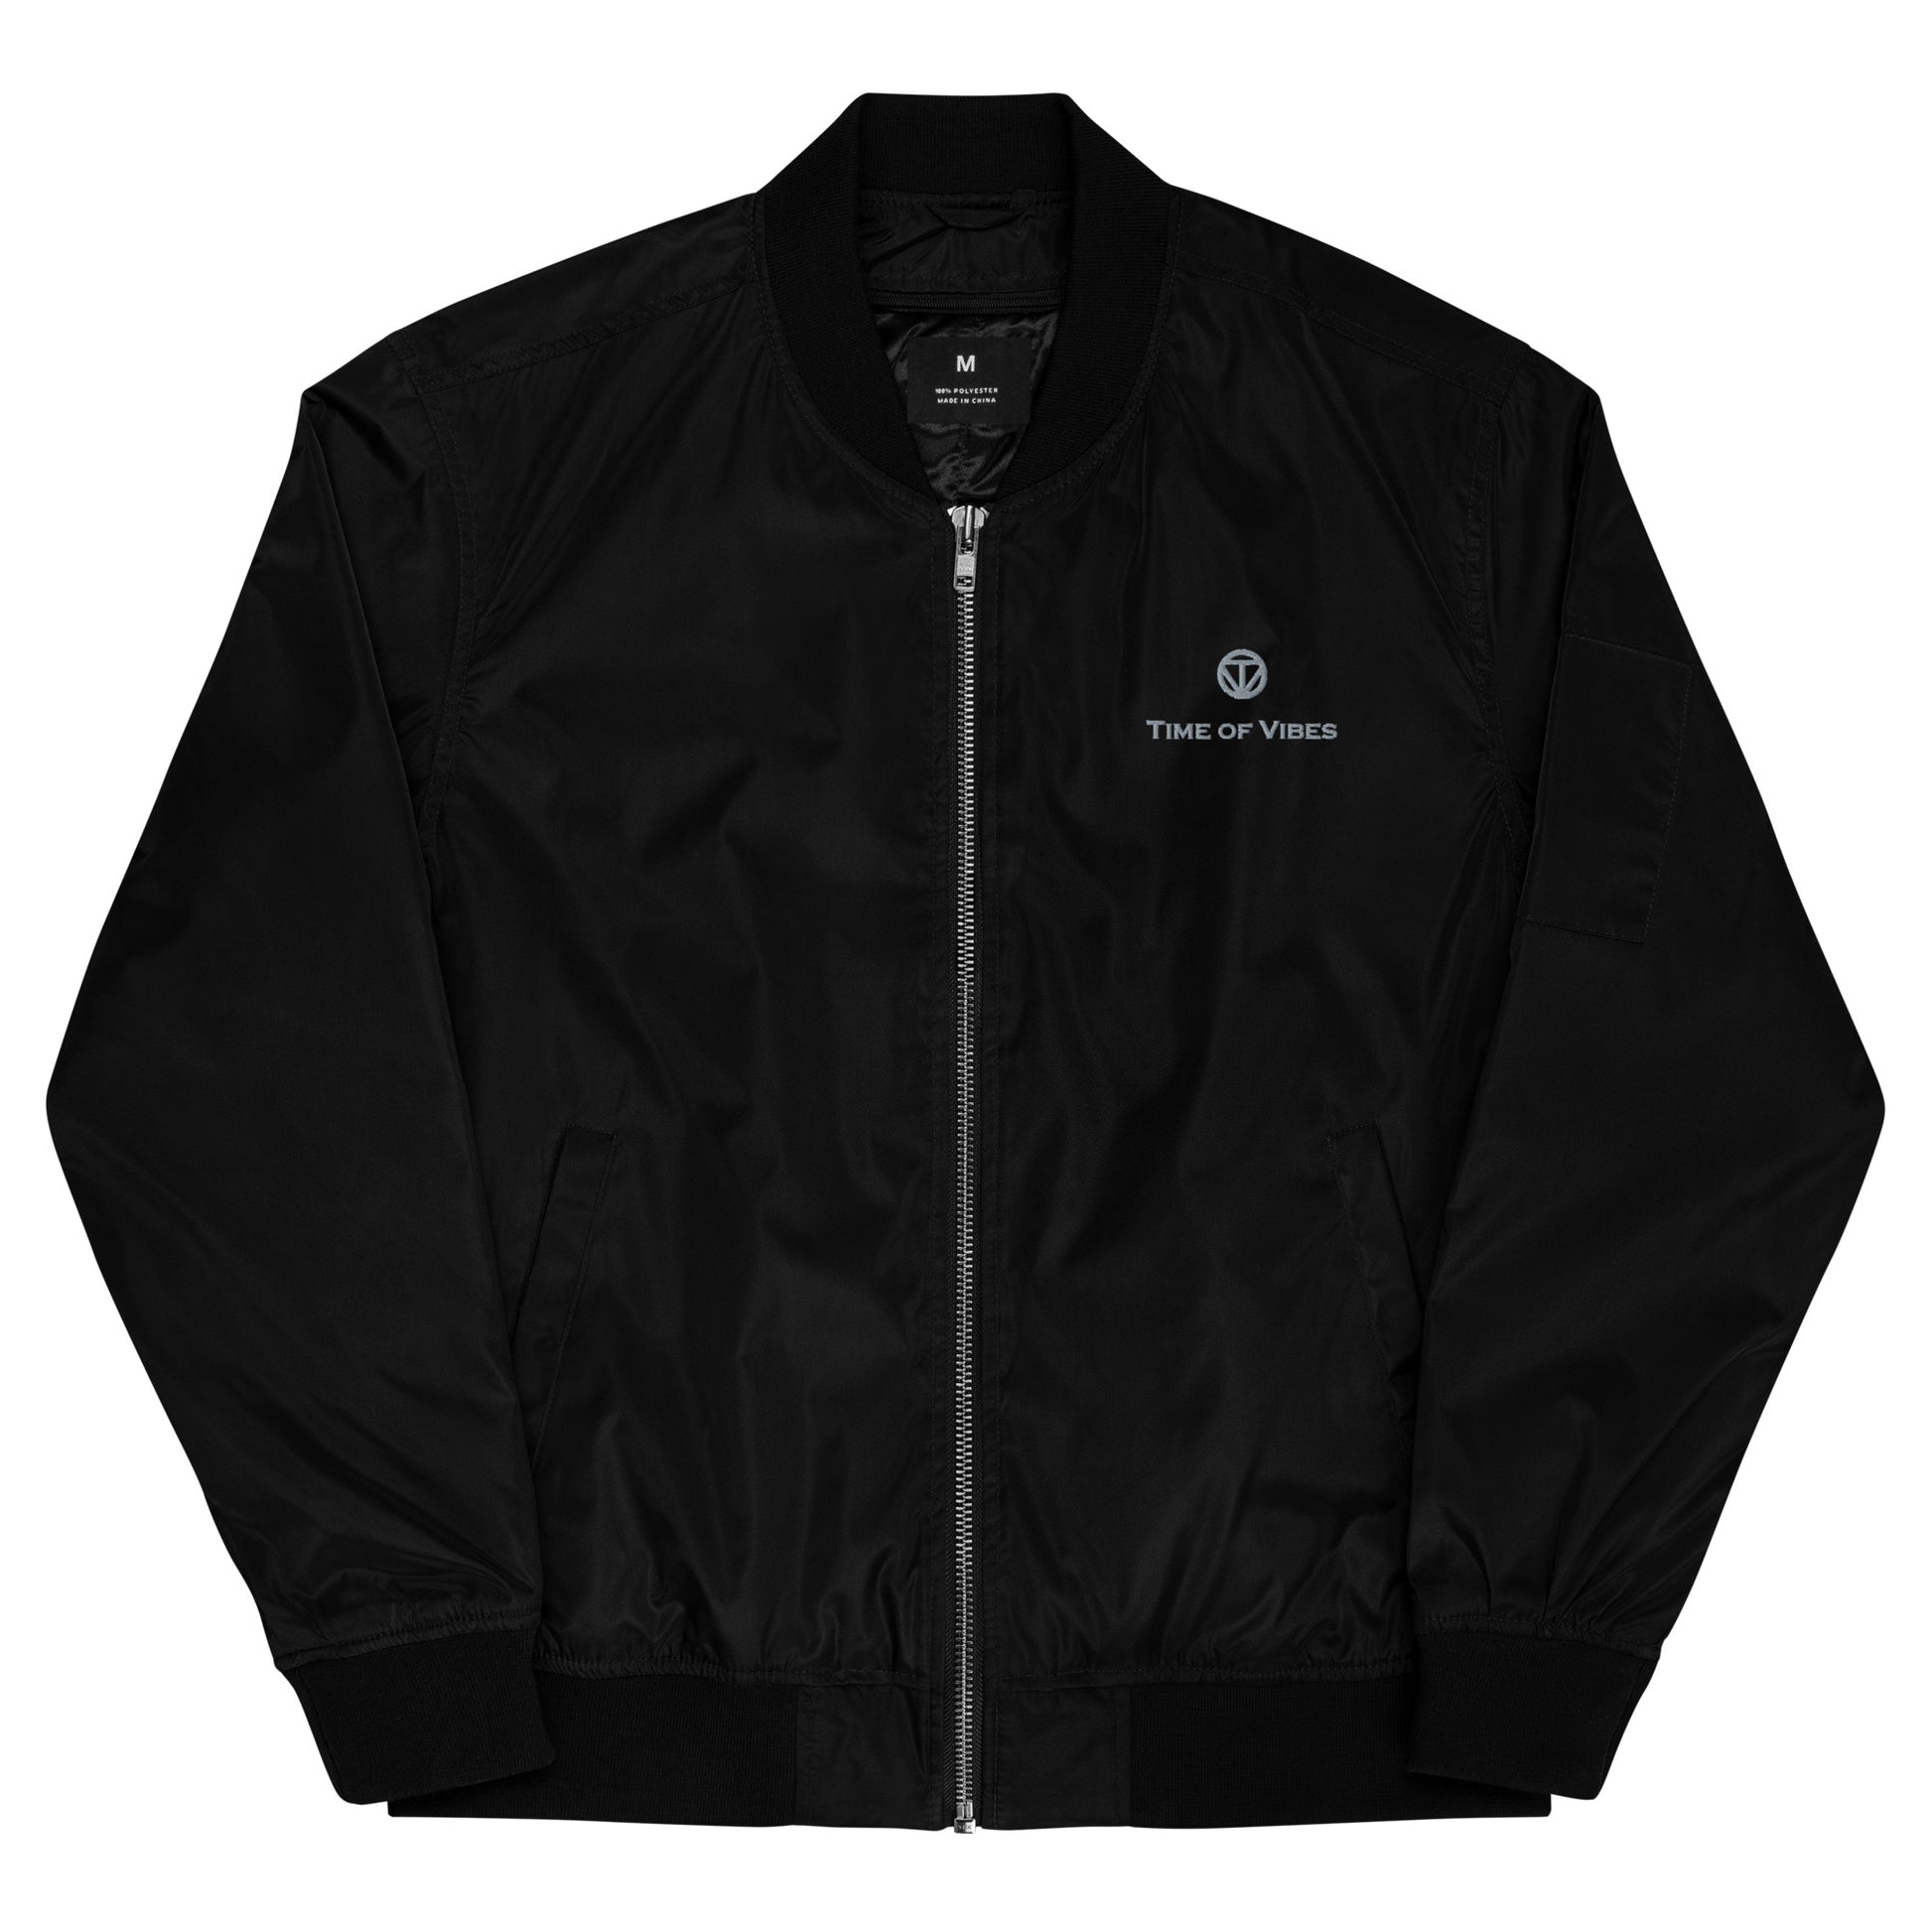 TIME OF VIBES - Premium recycled Blouson Jacket (Black) - €89.00